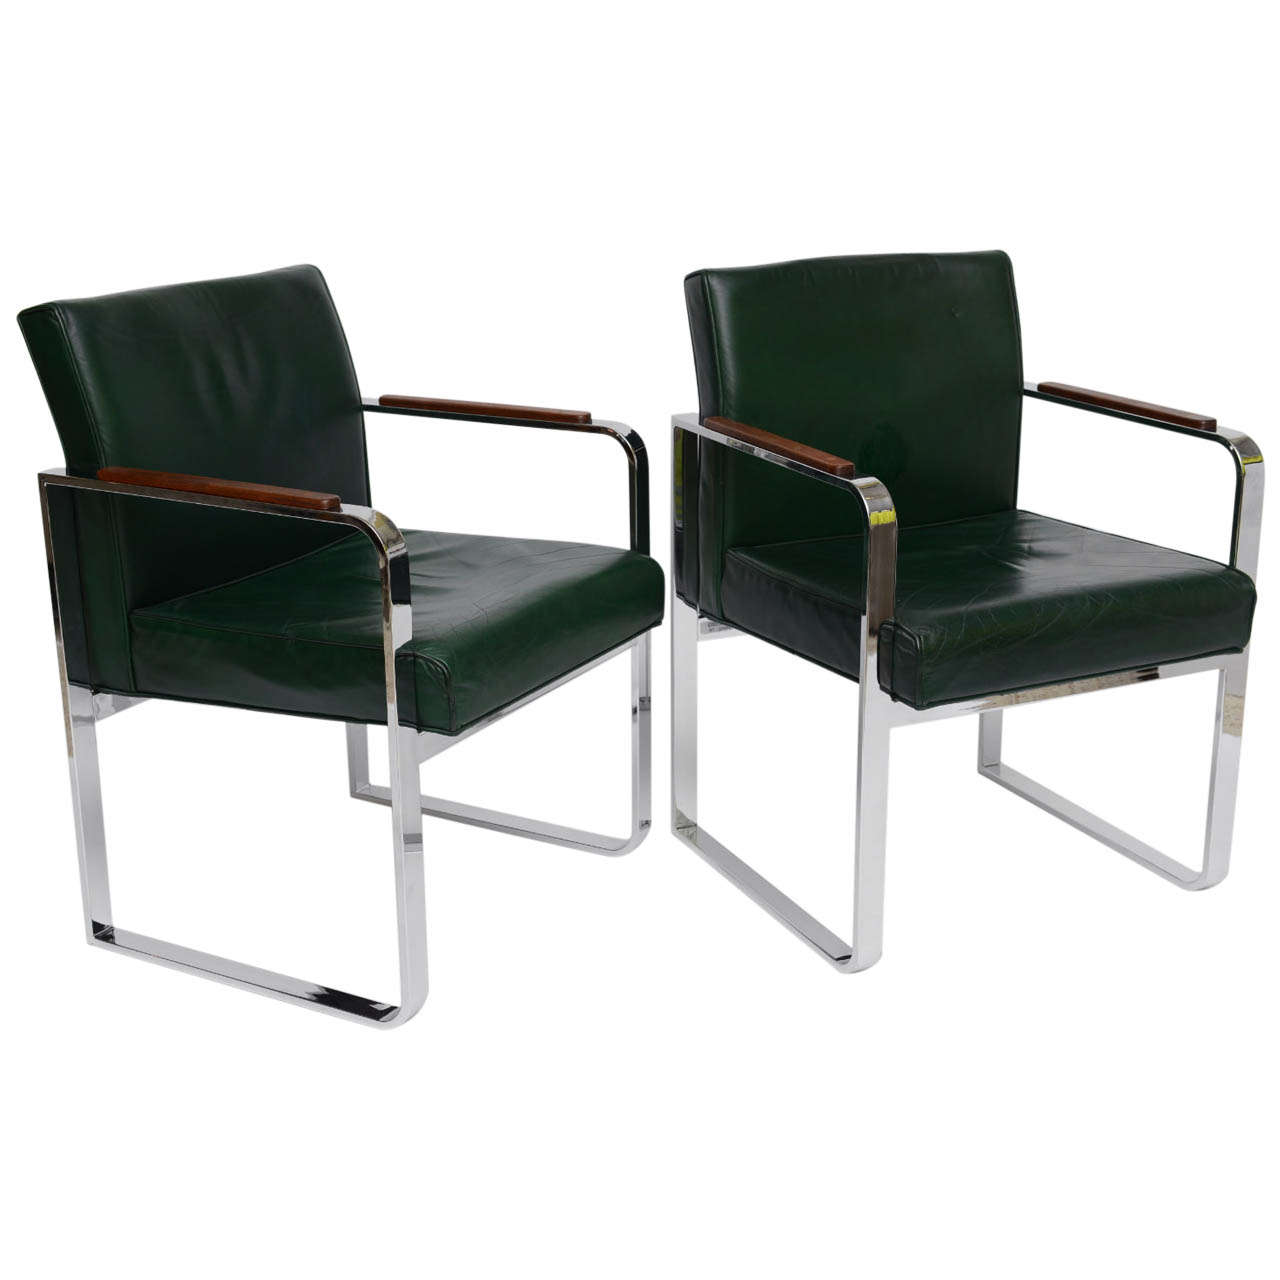 Pair of 1940s Green Leather Chrome Streamline Modern Armchairs